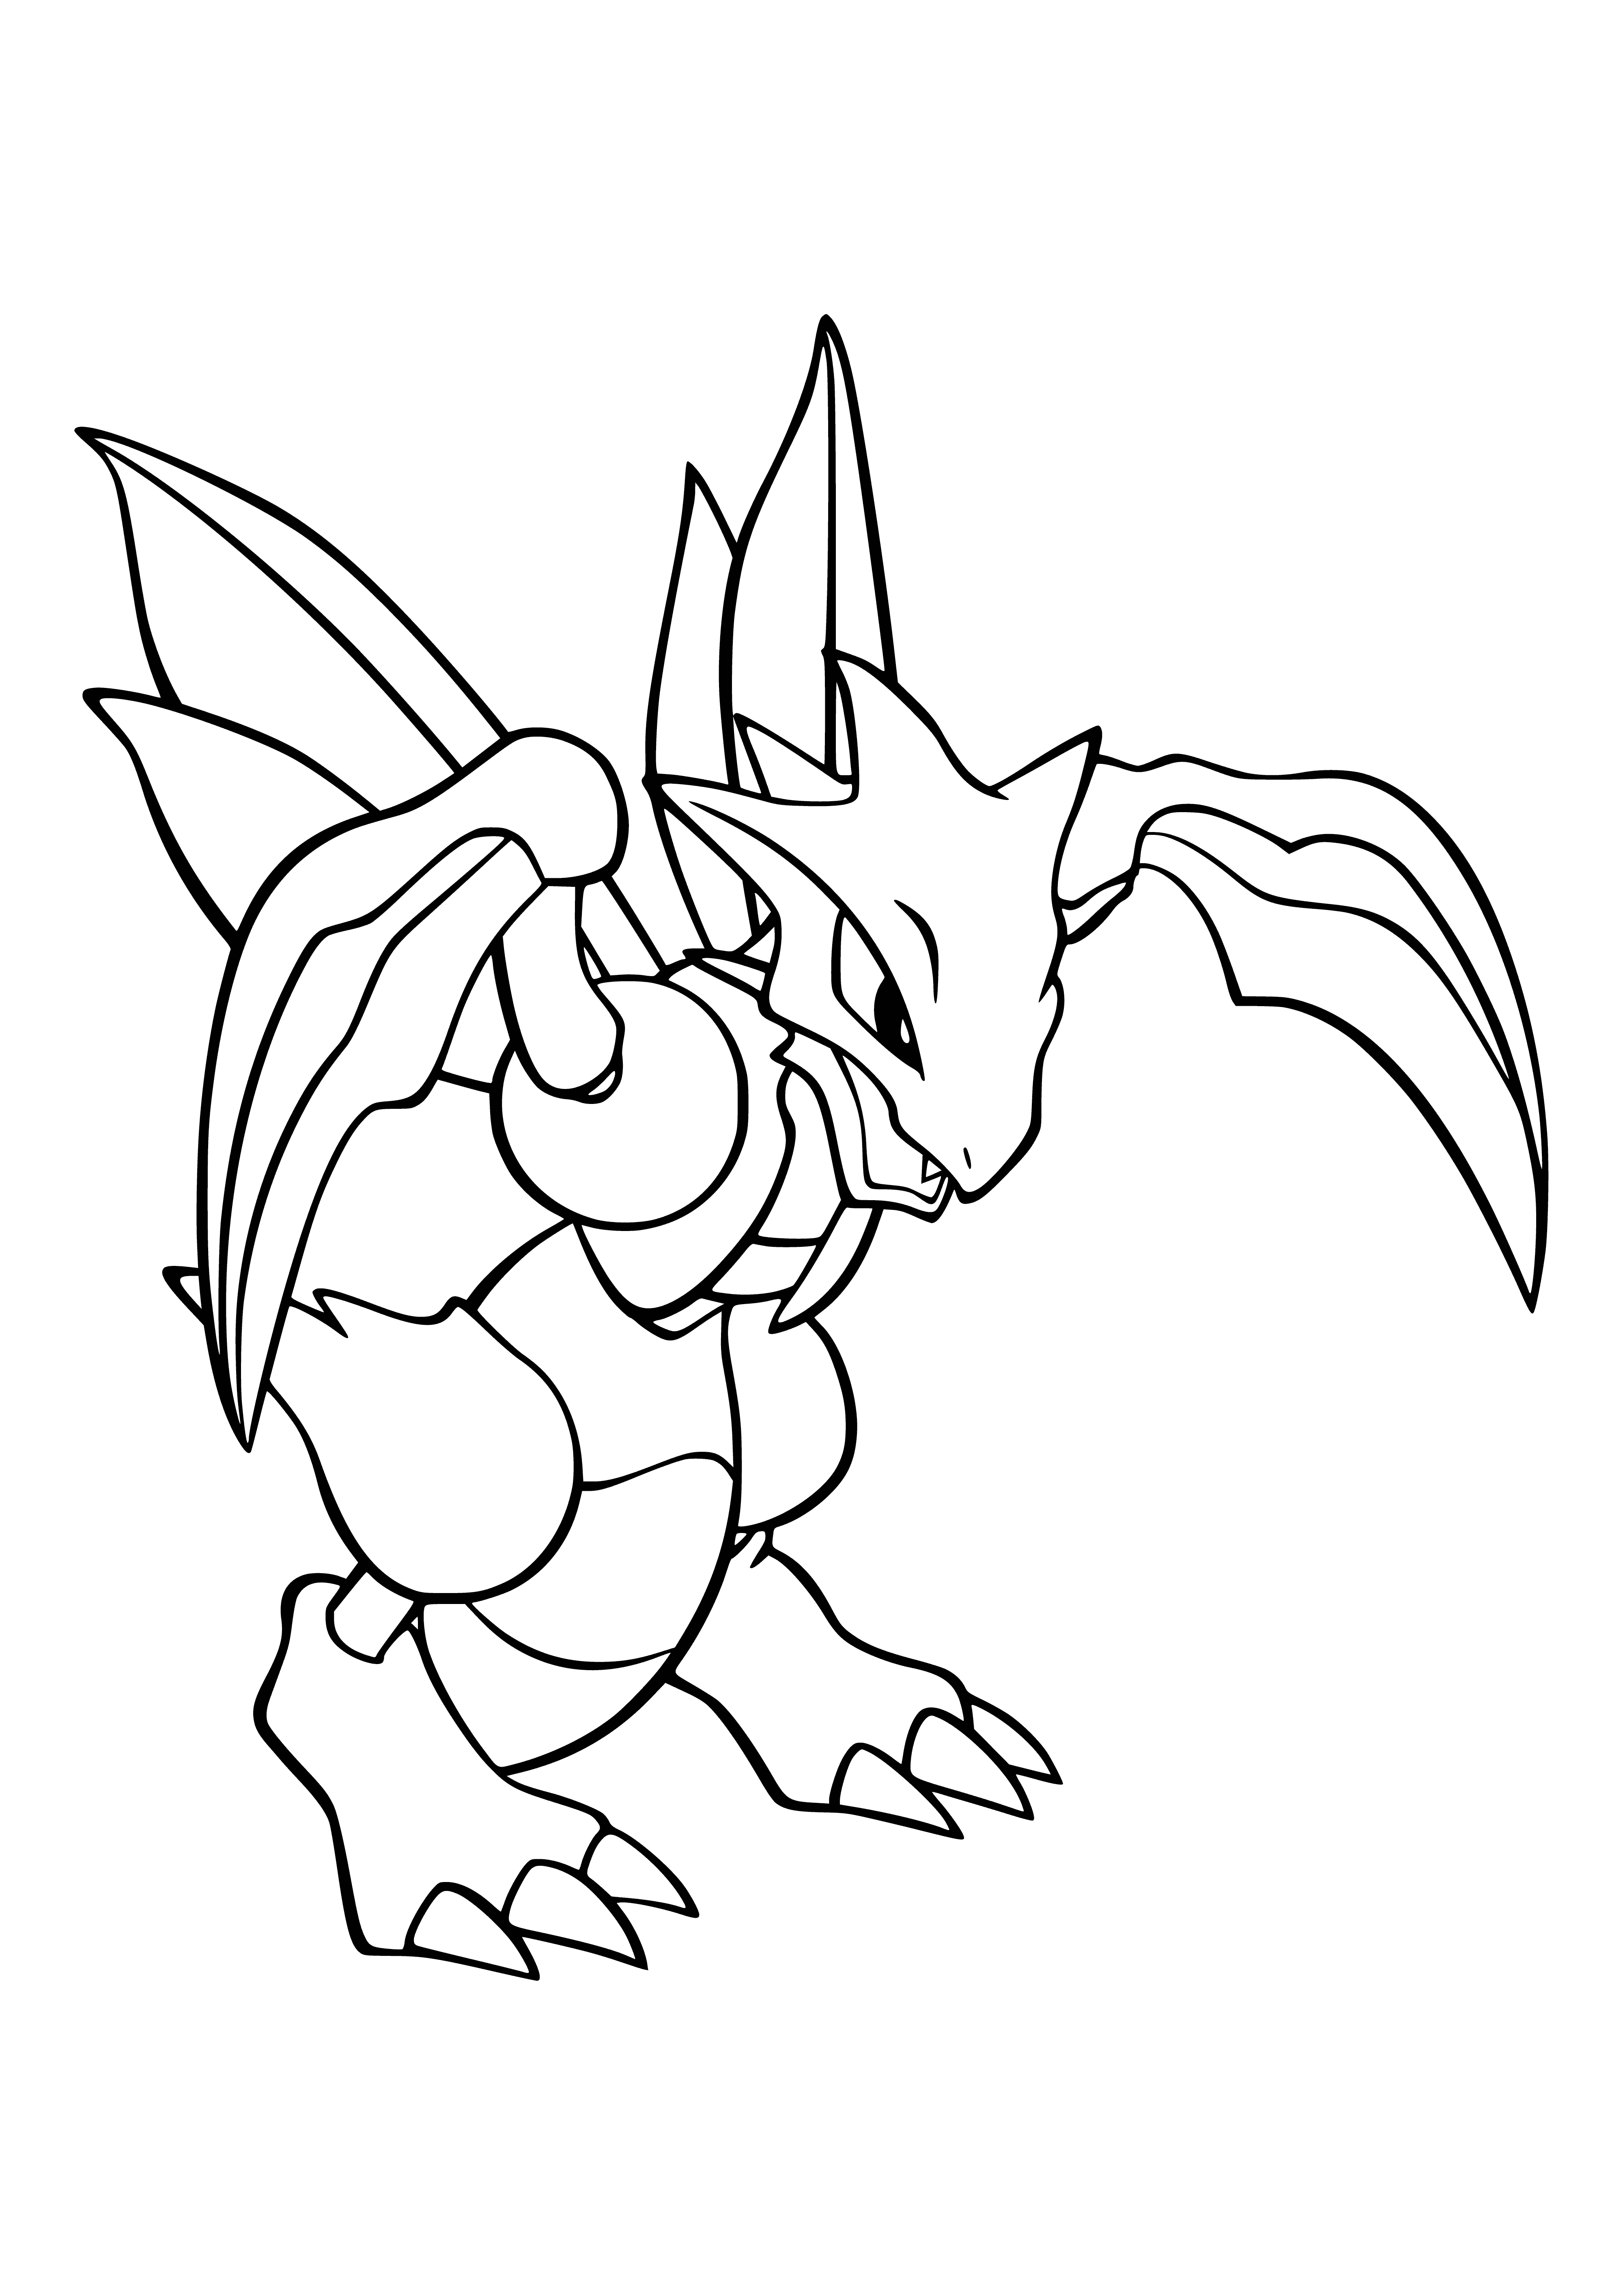 coloring page: Scyther, large predator Pokemon, is quick and agile. Has brown wings, scythe-like blades, green skin, and yellow eyes.